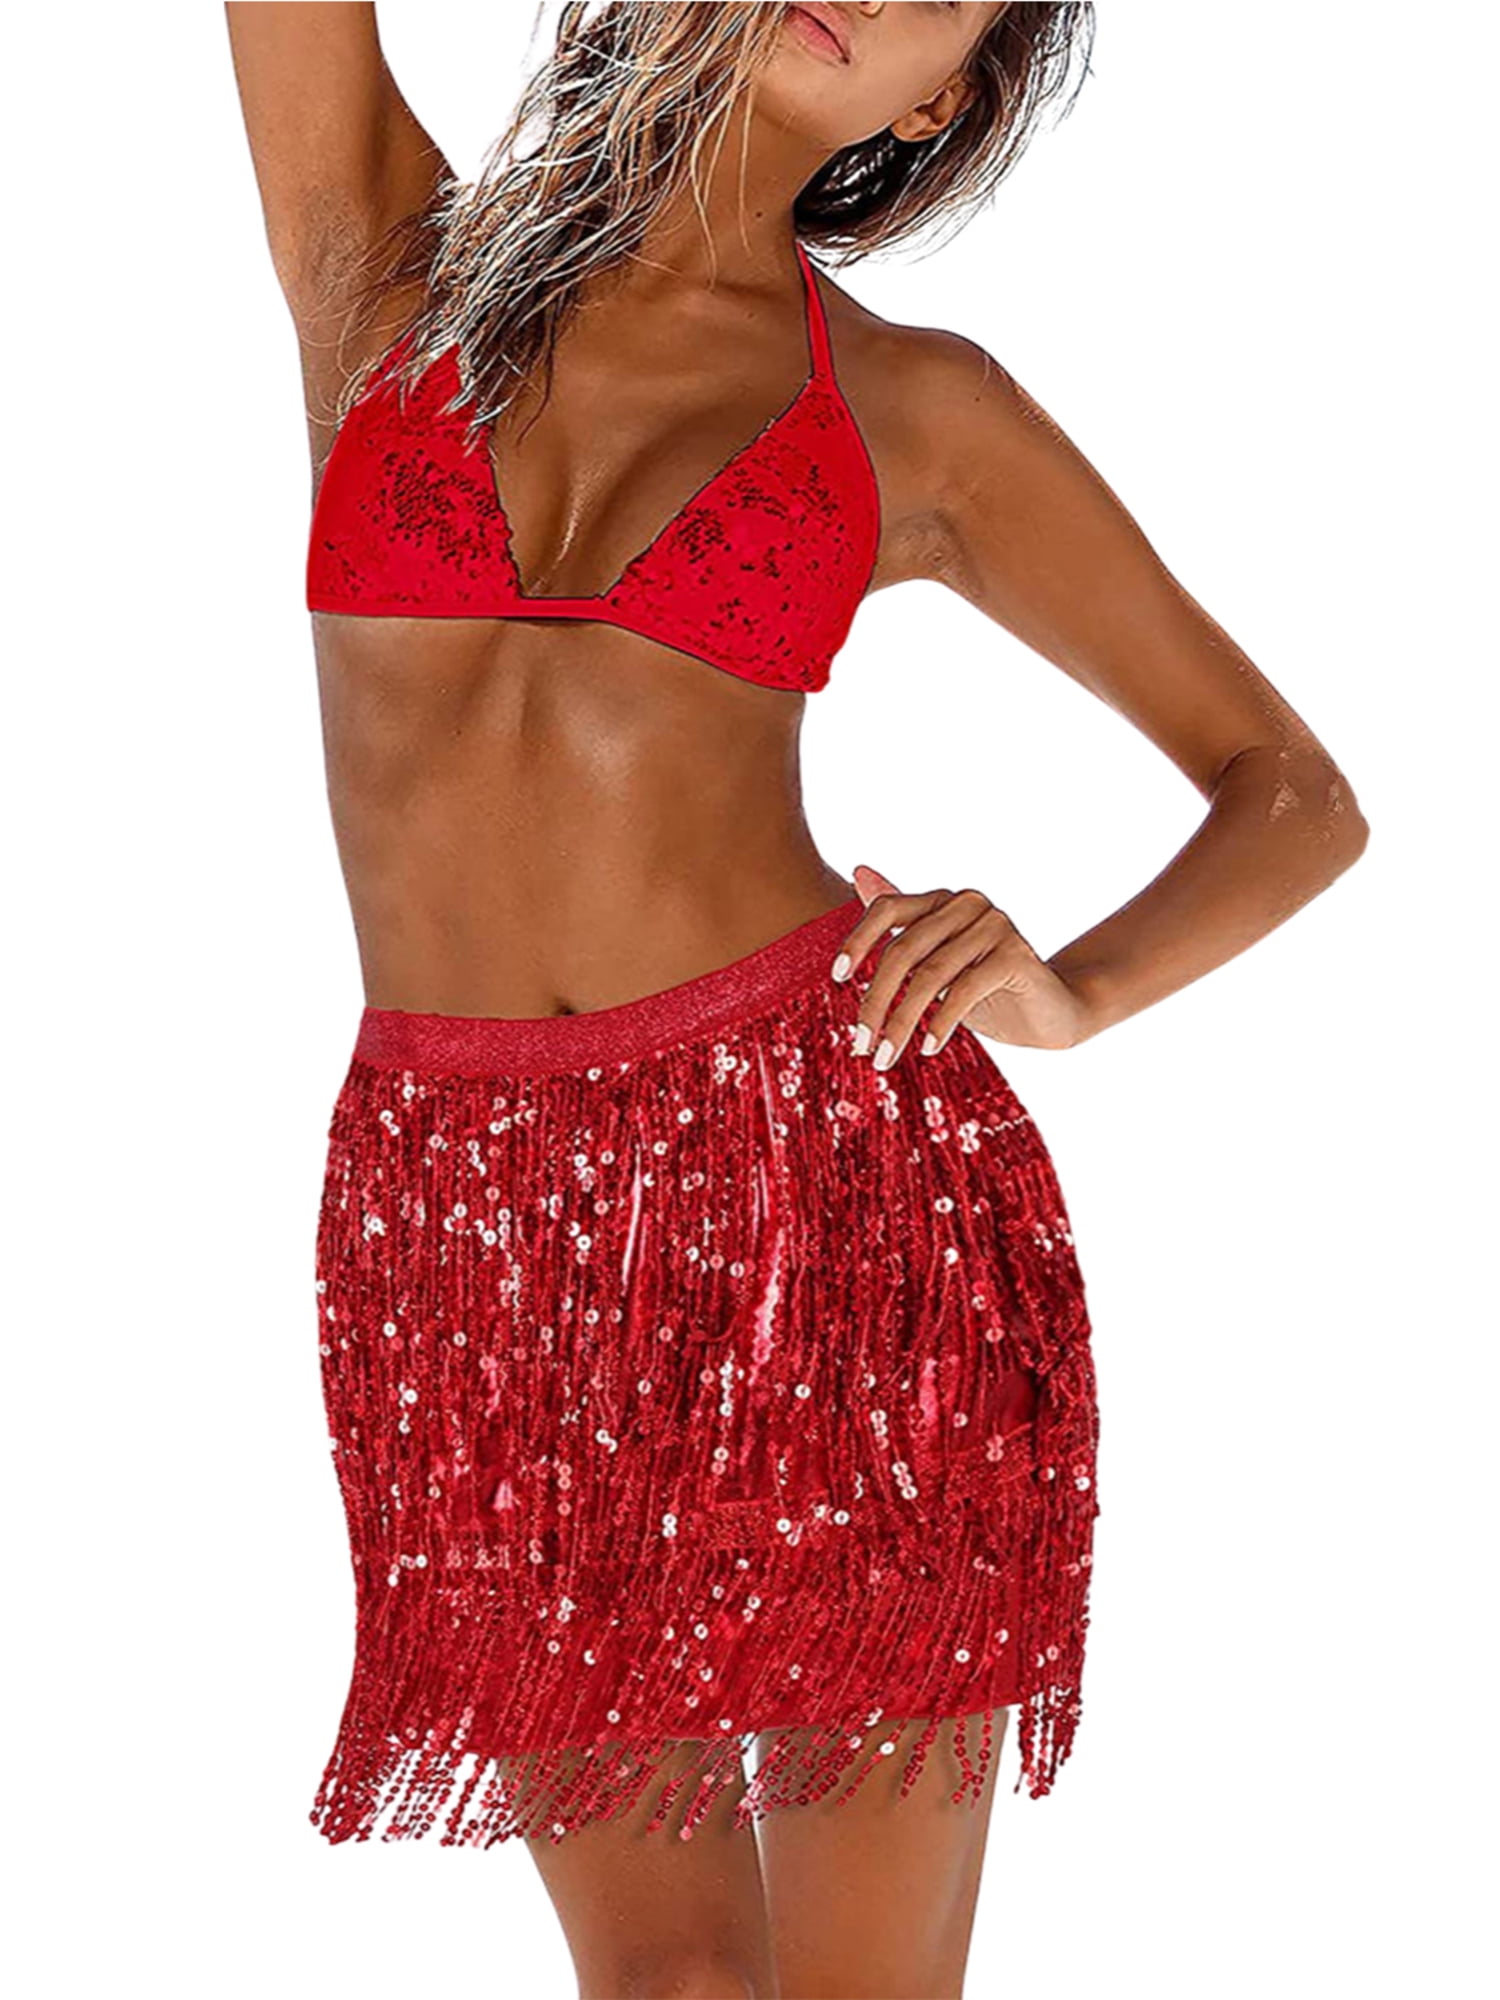 Canrulo Womens Belly Dance Hip Skirt Sequin Tassel Fringe Skirts Scarf Belt  Dance Rave Party Clubwear Outfits Red L 